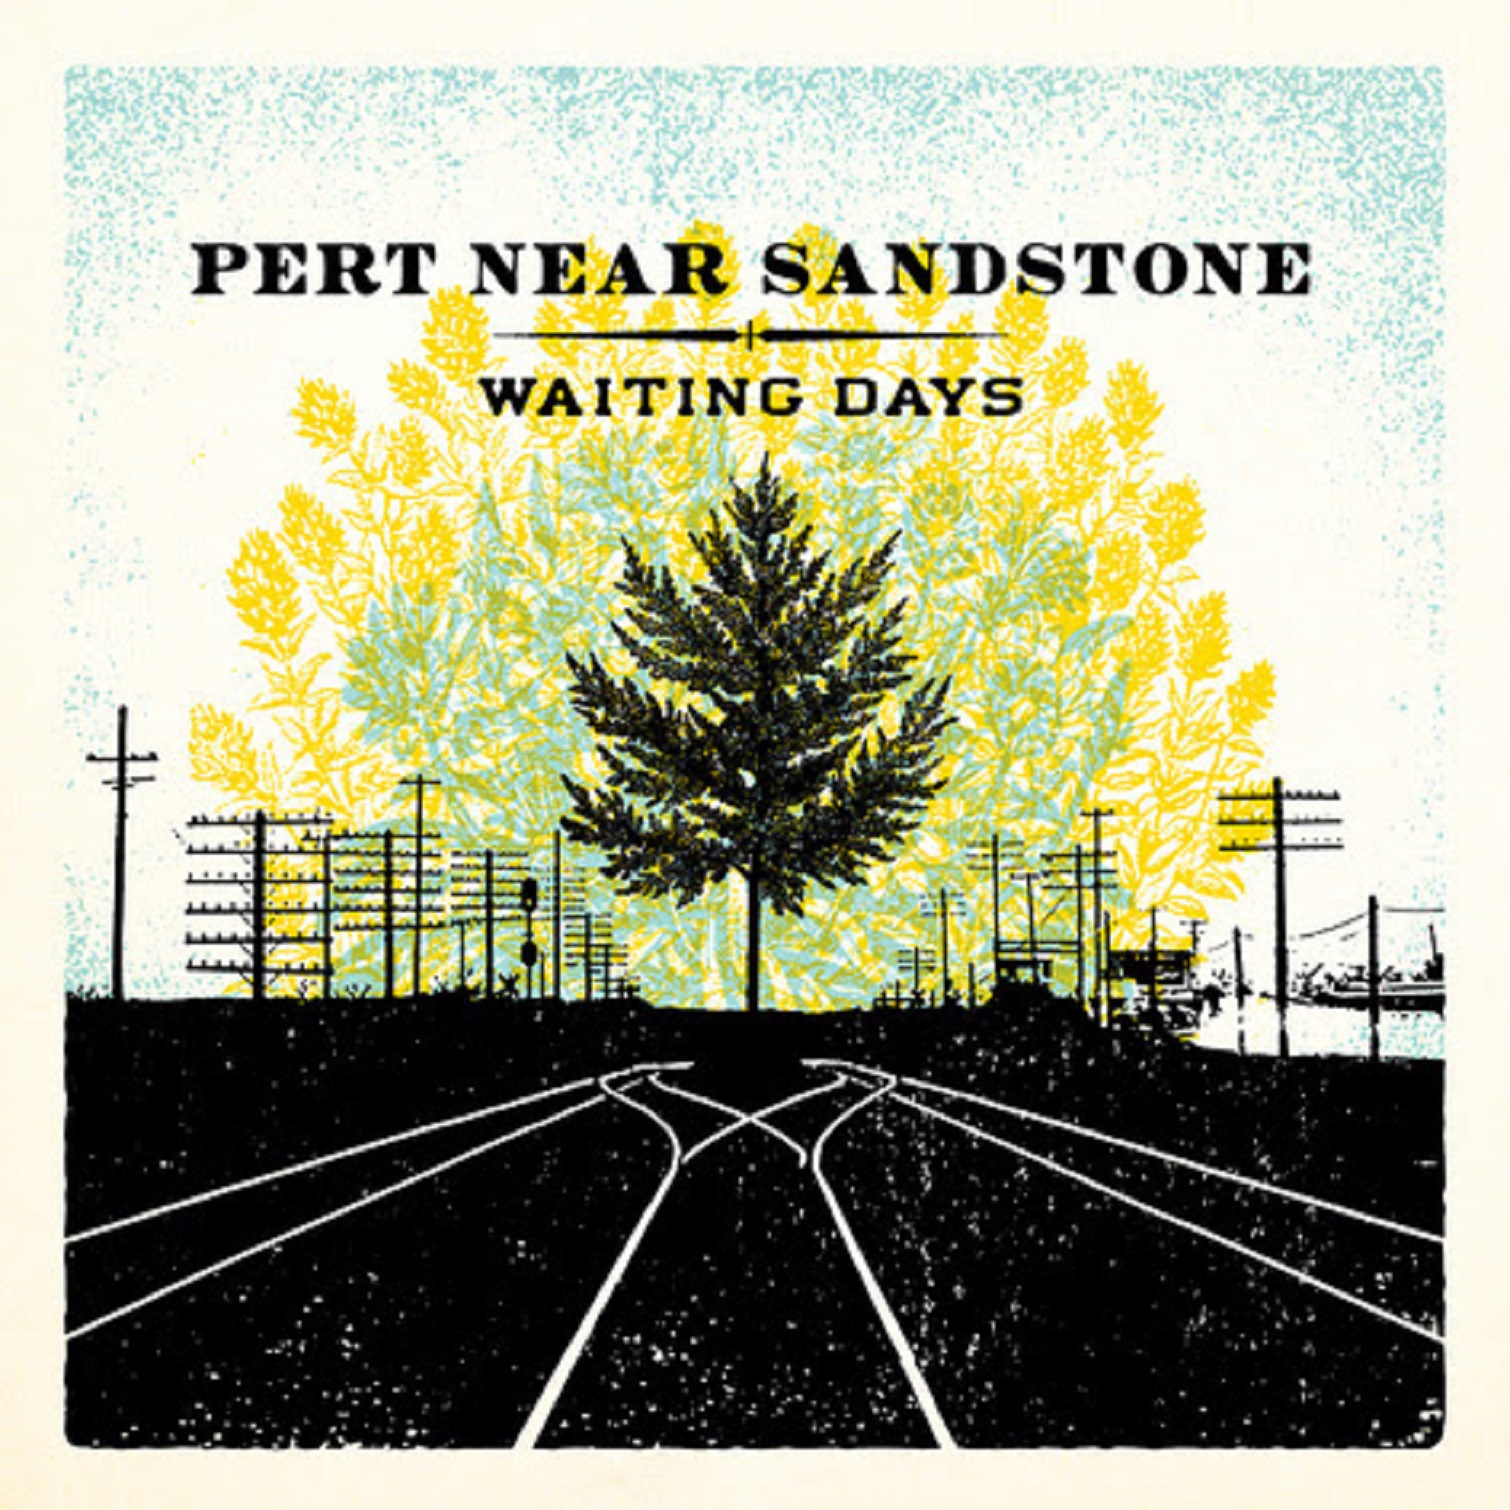 Pert Near Sandstone Releases Lively Single, "I've Been Traveling" - New Album Out in October